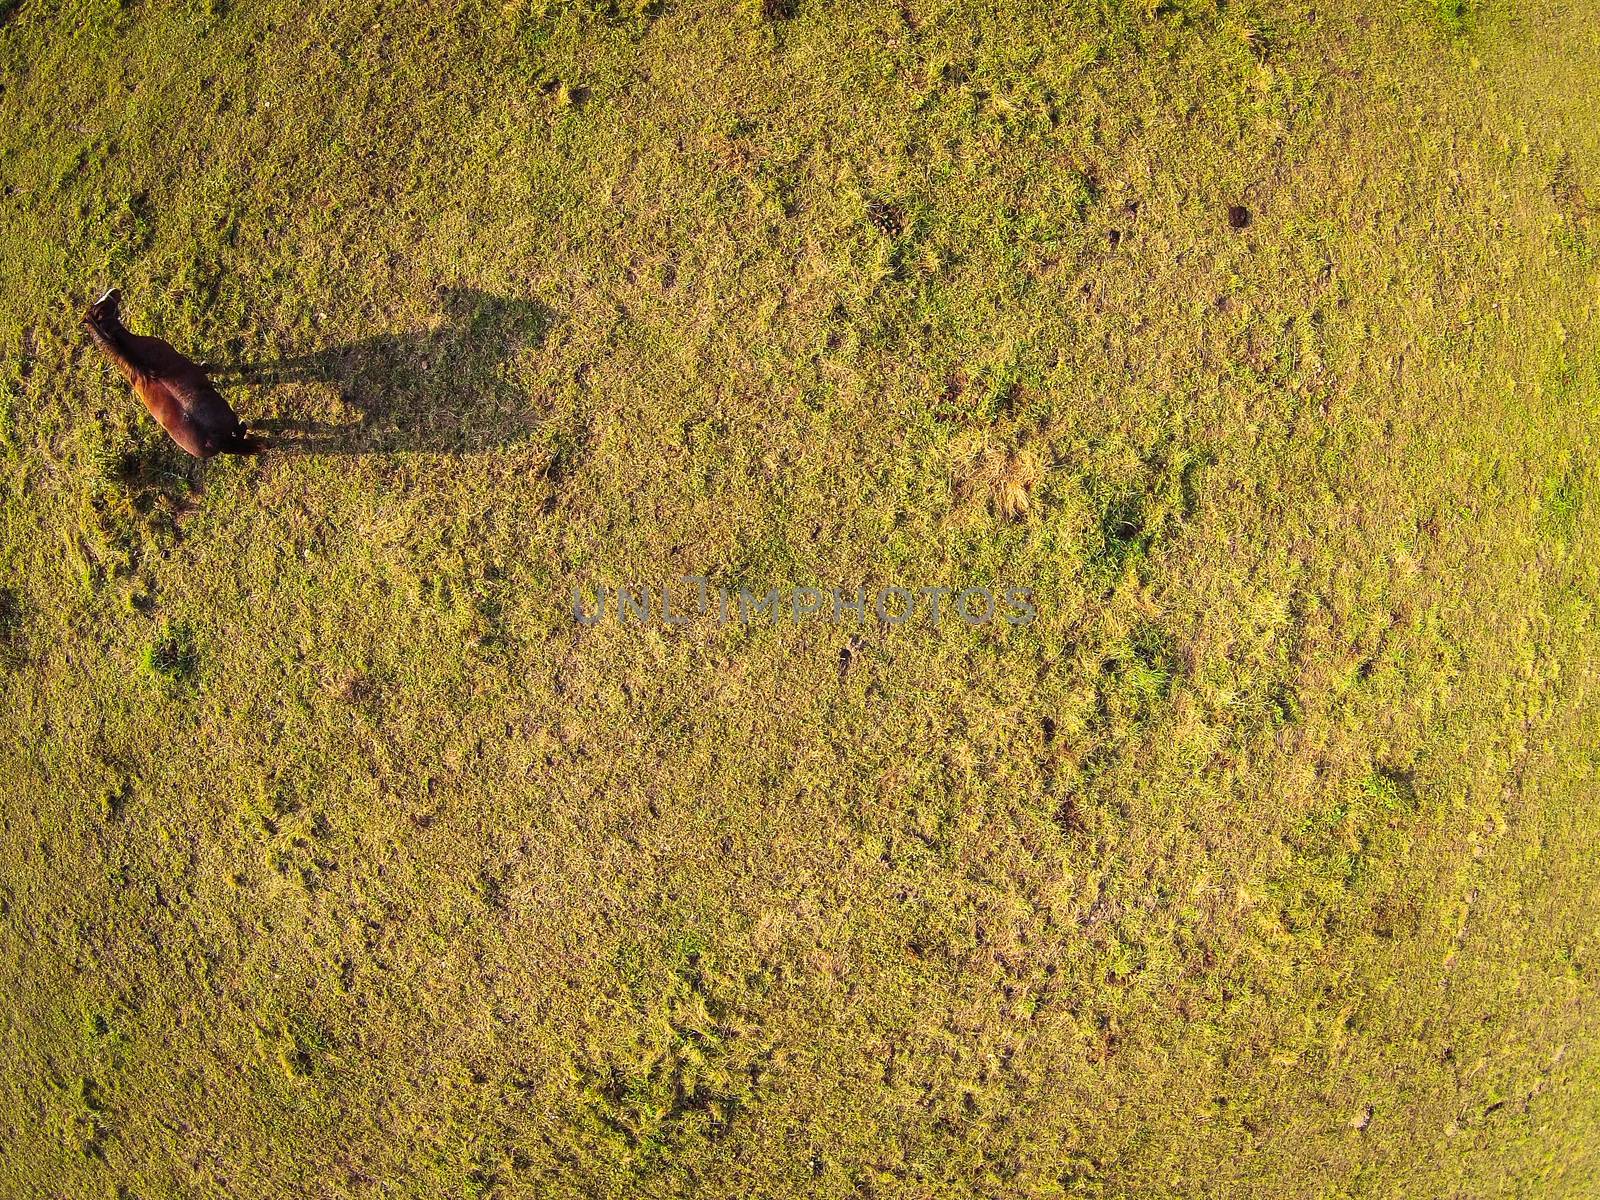 Aerial view over a pasture with a horse casting a shadow by viktor_cap